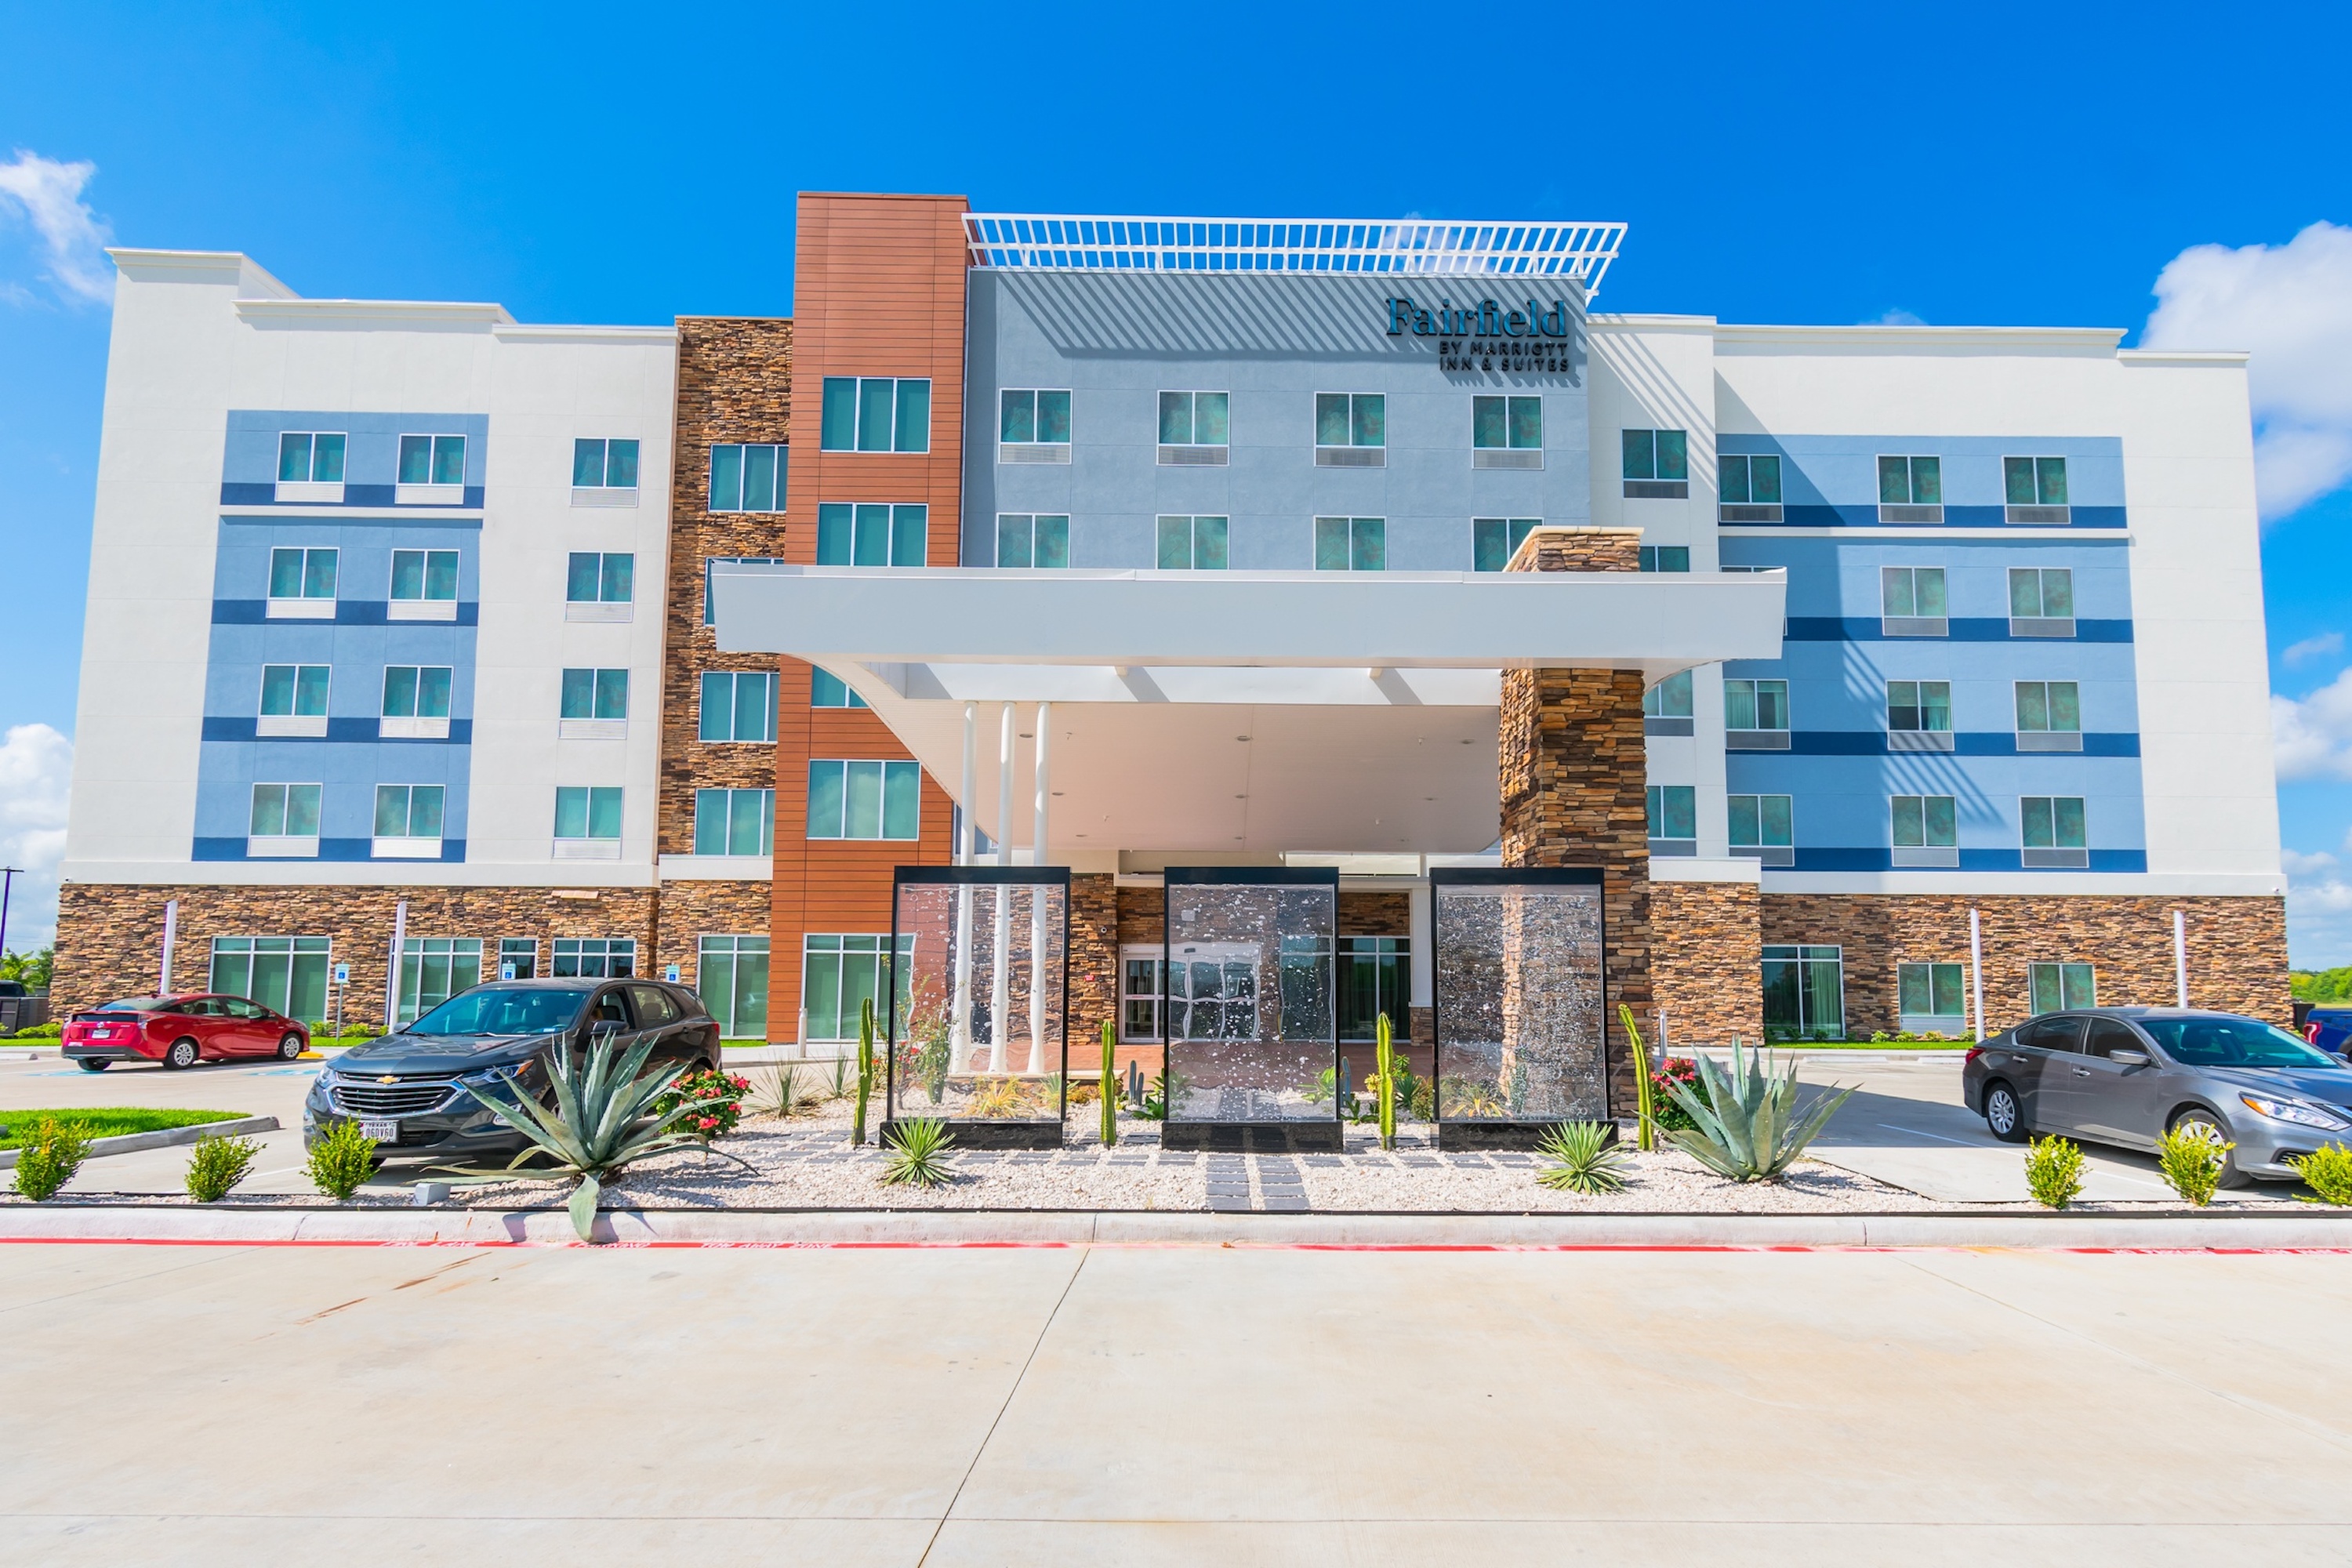 COMMUNITY SPOTLIGHT: Chamber member Fairfield Hotel brings heart and determination to League City